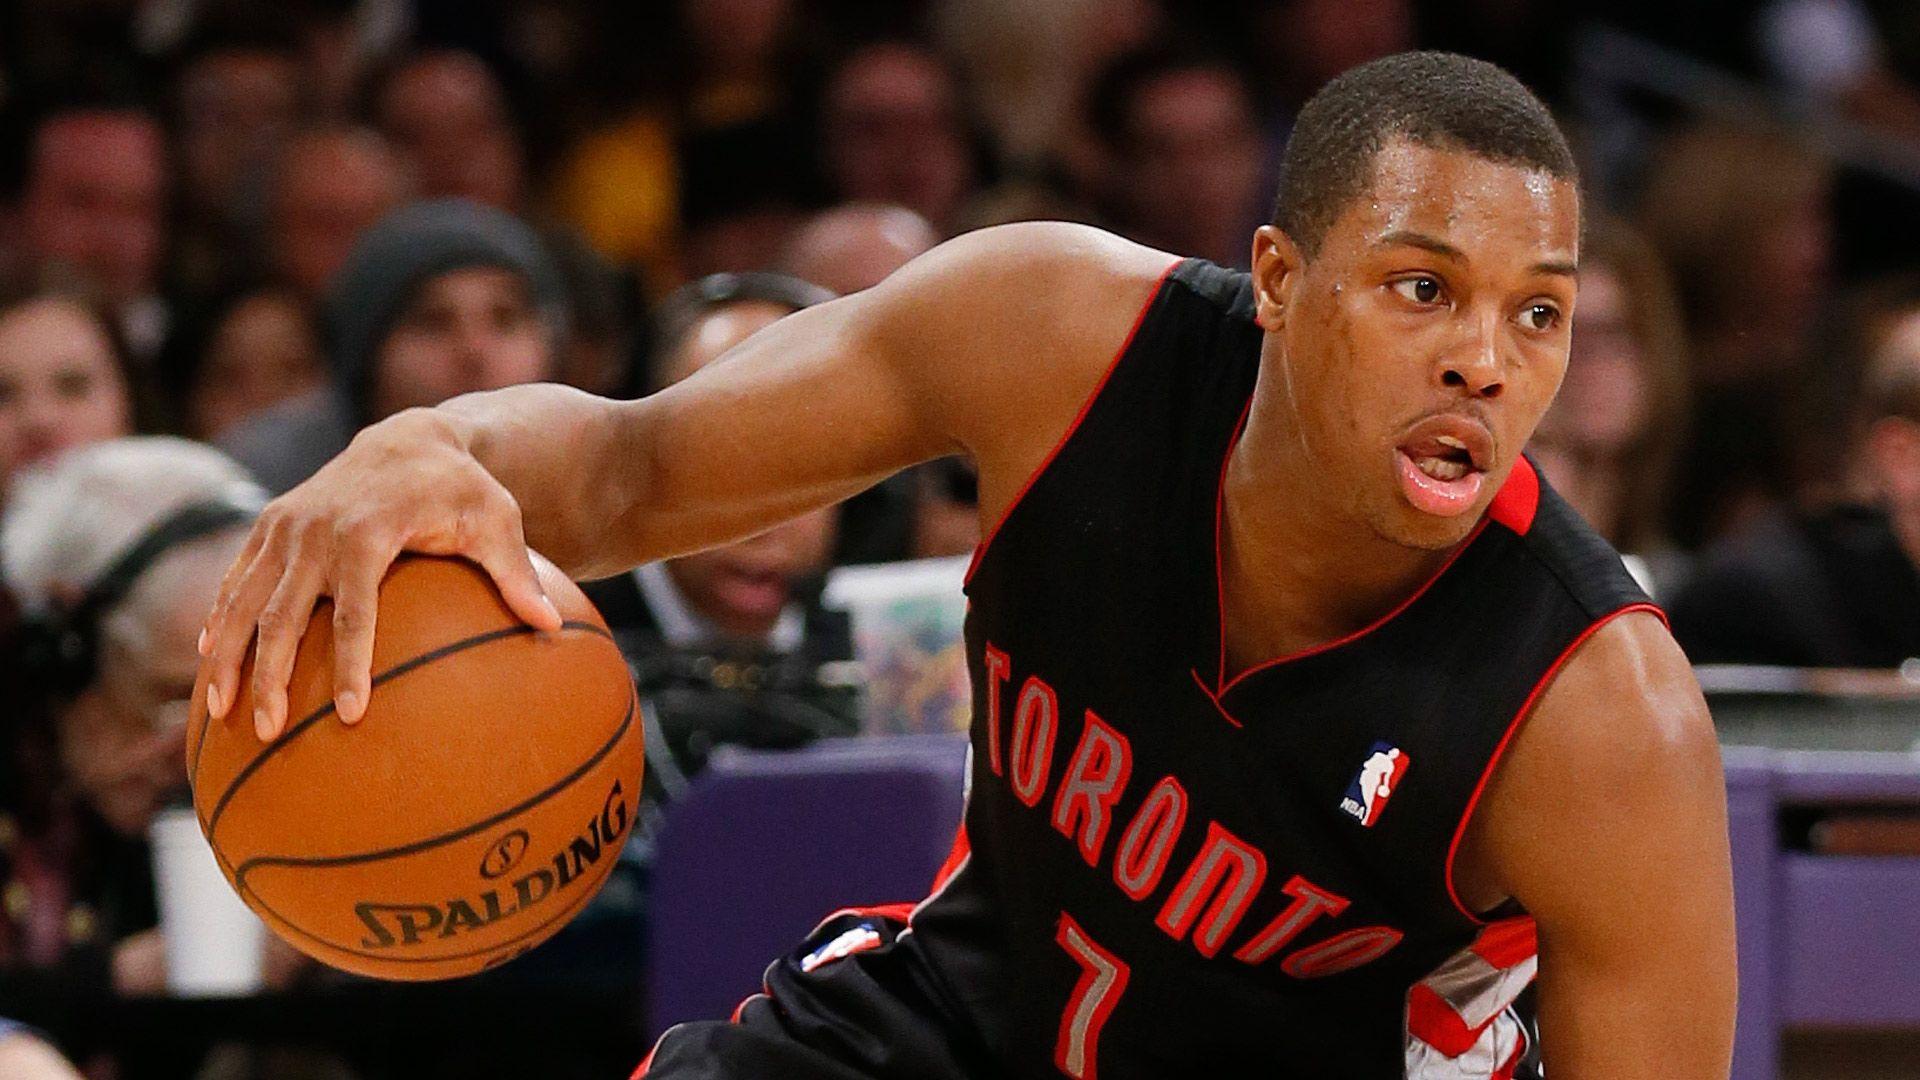 Kyle Lowry gets second chance to give shoes to snubbed fan. NBA